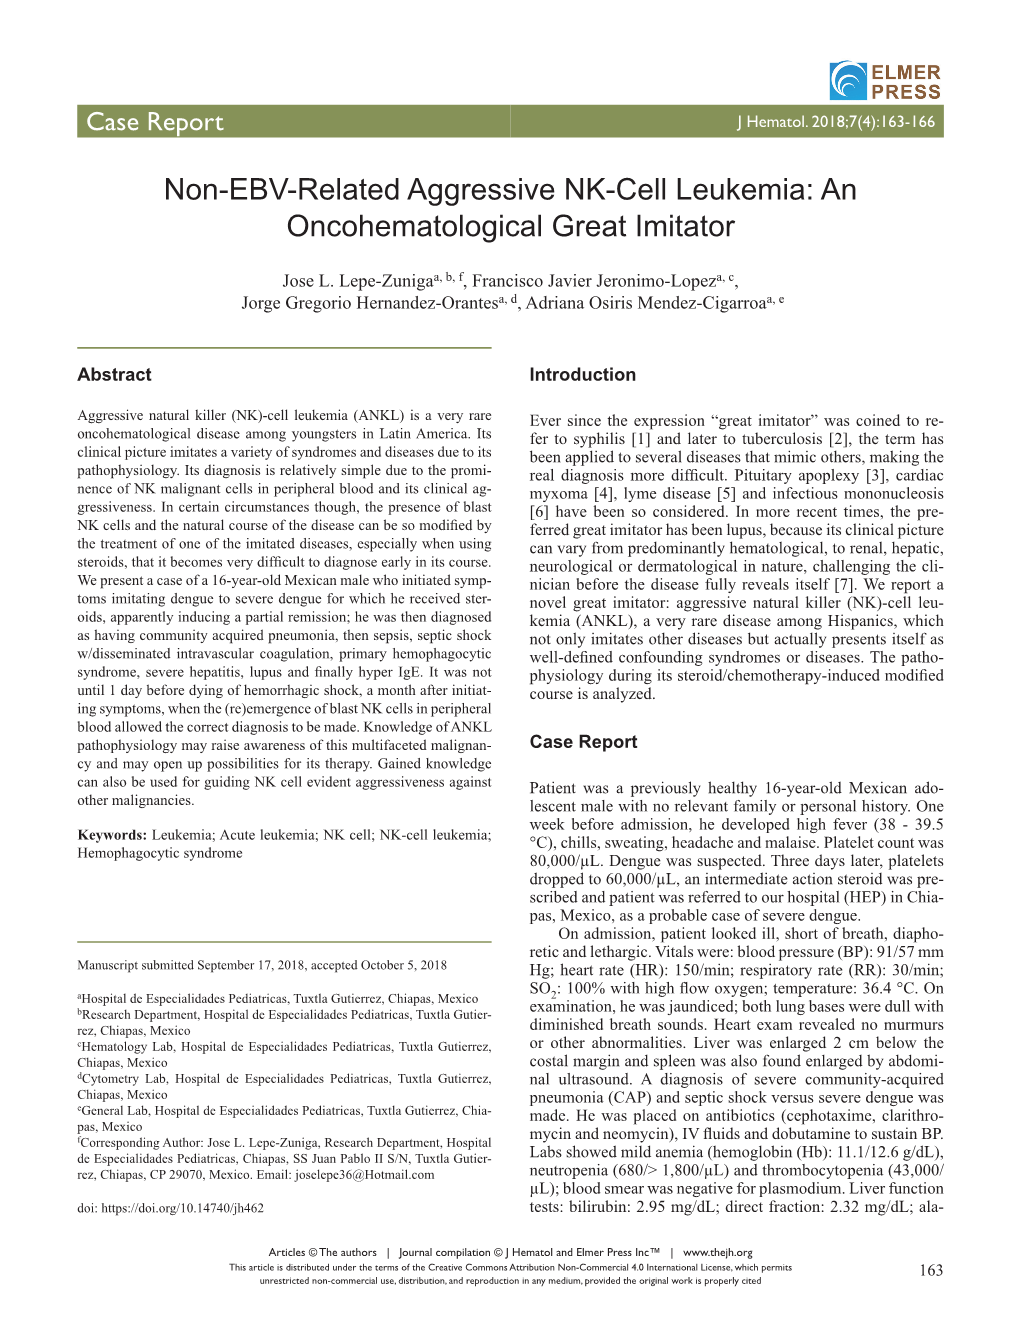 Non-EBV-Related Aggressive NK-Cell Leukemia: an Oncohematological Great Imitator